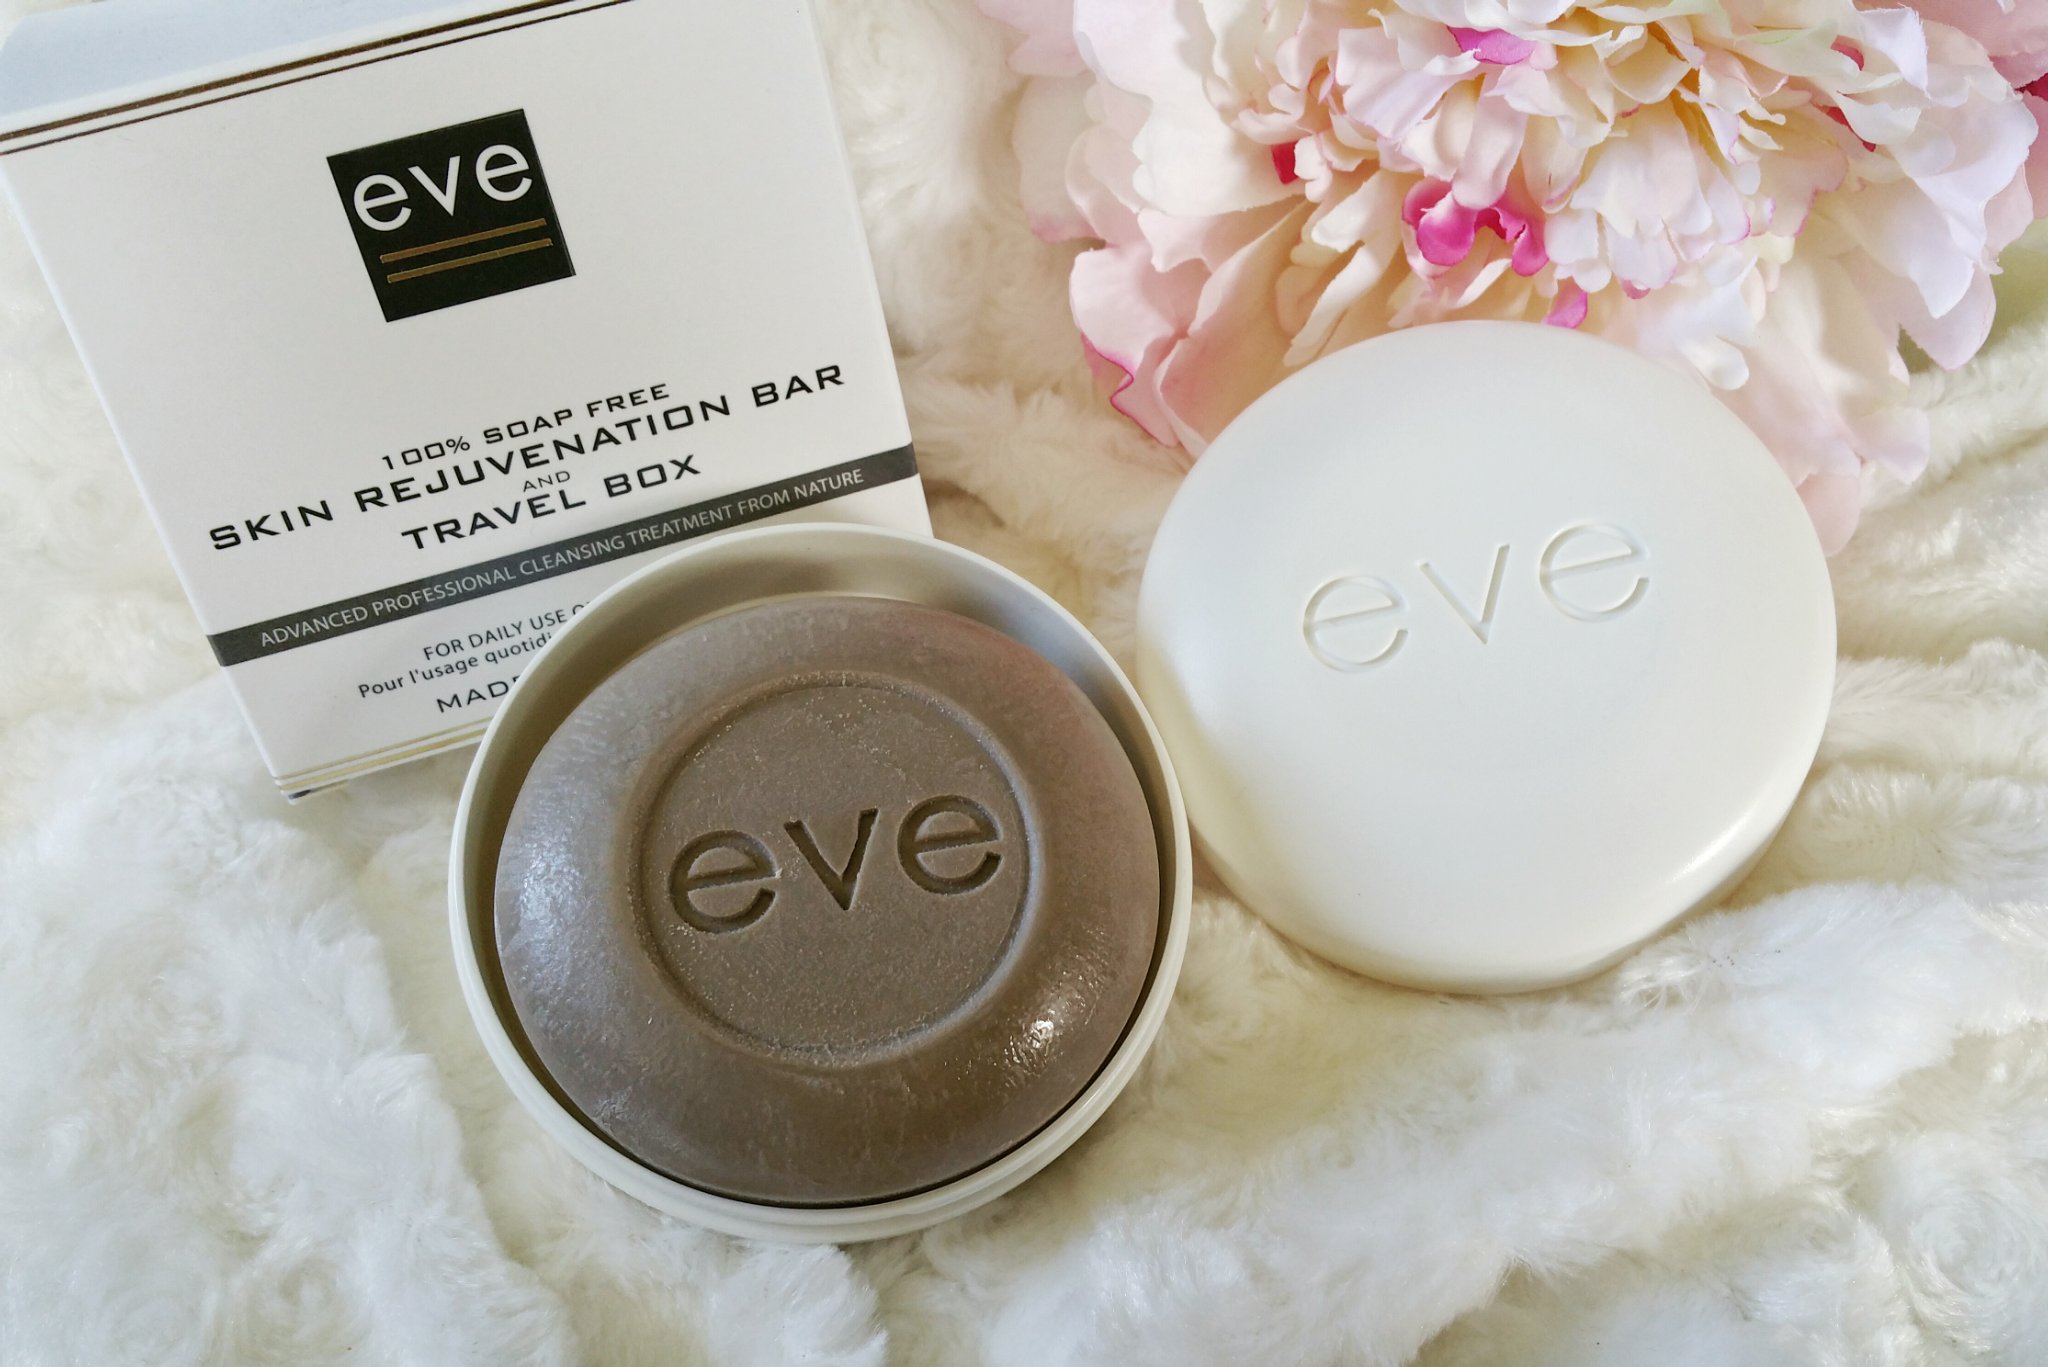 Eve skincare, eve rejuvenation bar, eve skin rejuvenation bar, skin care, review, skin rejuvenation kit, cleansing bar, change your skin in 2 minutes, 100% soap free, made in Australia, daily use, facial cleanser, facial cleansing bar, skin cleaning, clean skin,